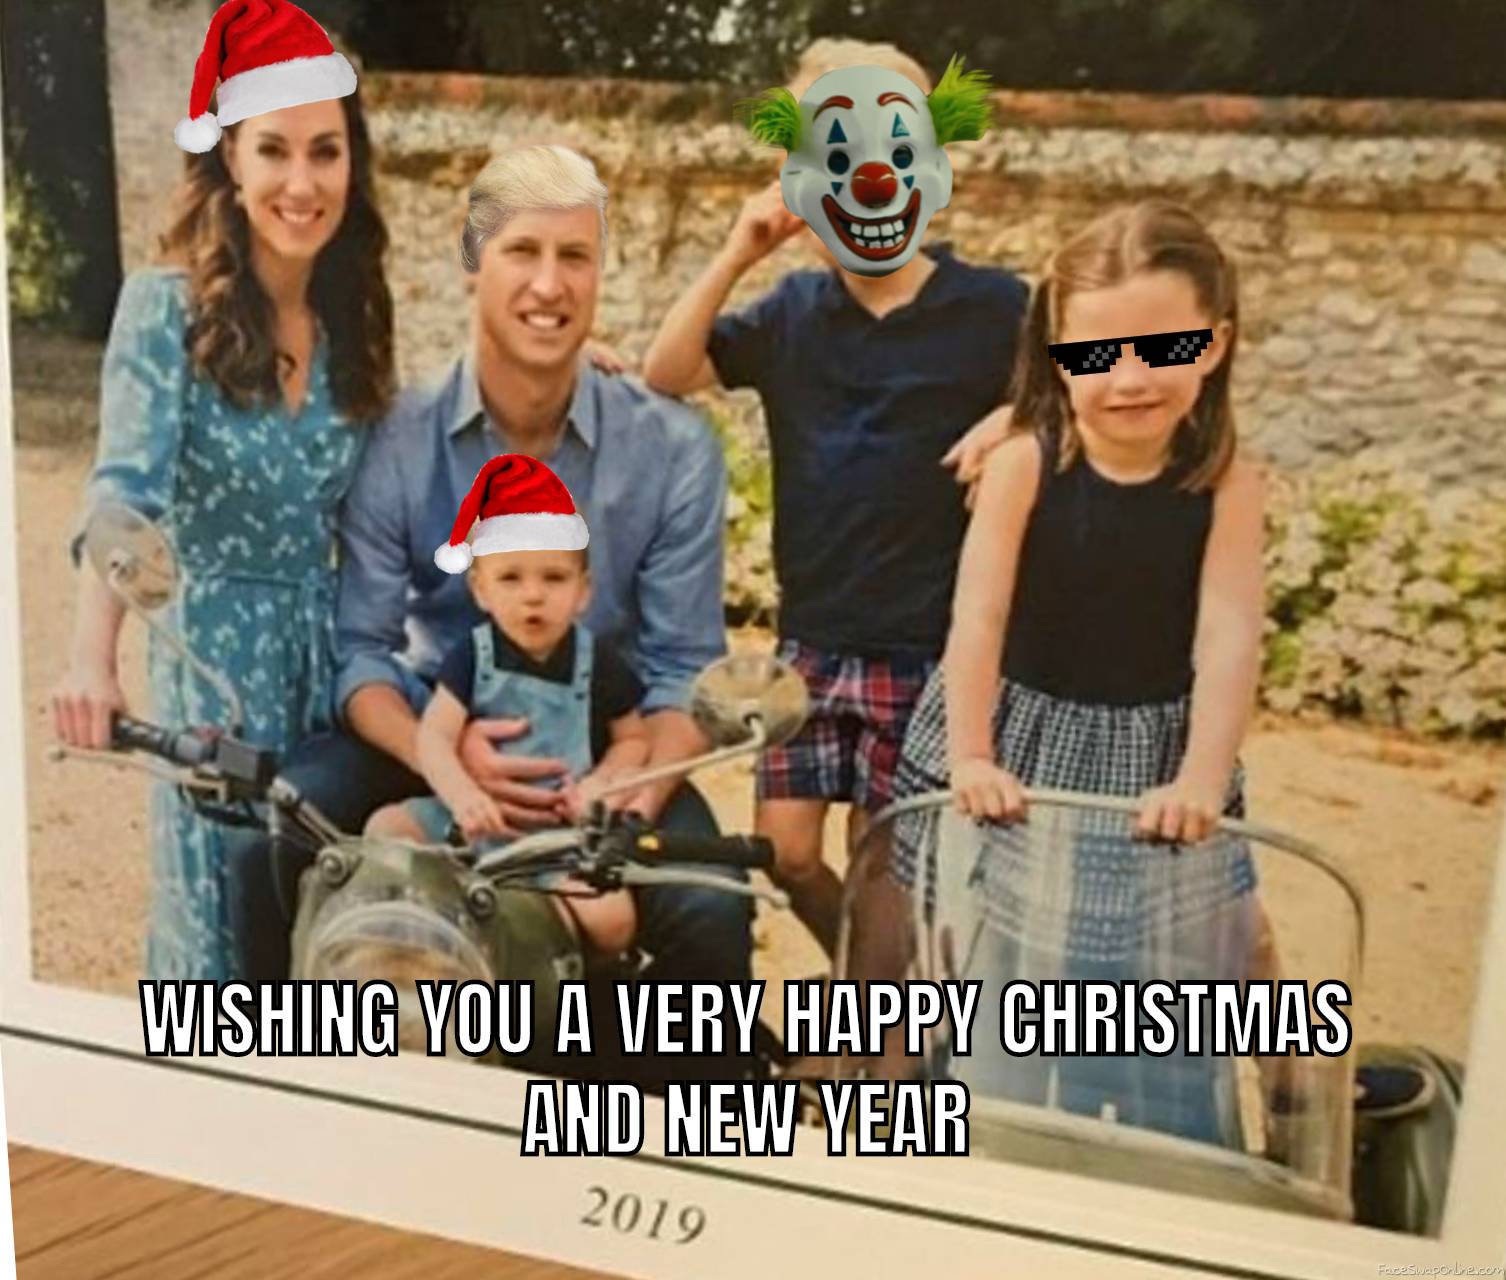 Kate Middleton and Prince William's 2019 Christmas Card leaked